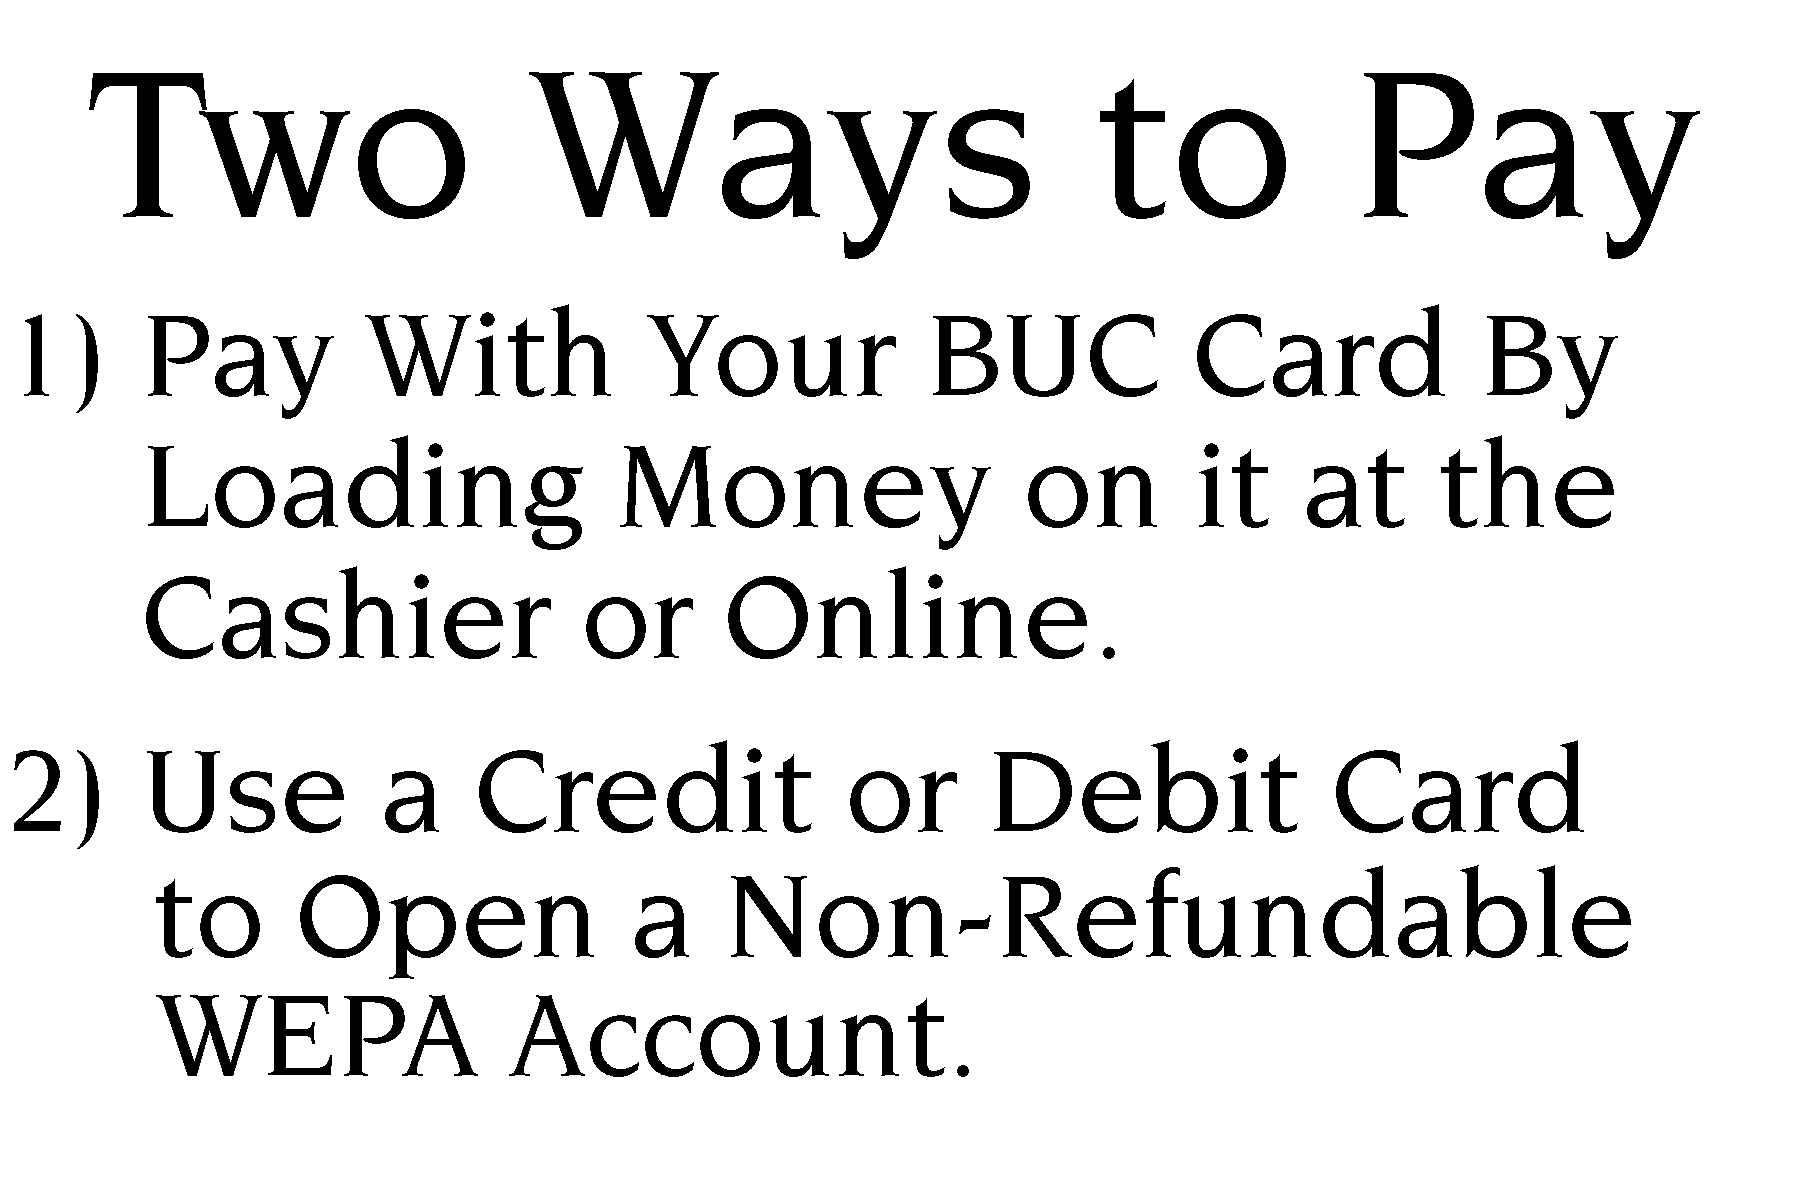 Two ways to pay. 1. Pay with your buc card by loading money on it at the cashier or online. 2. Use a credit or debit card to open a non-refundable wepa account. 